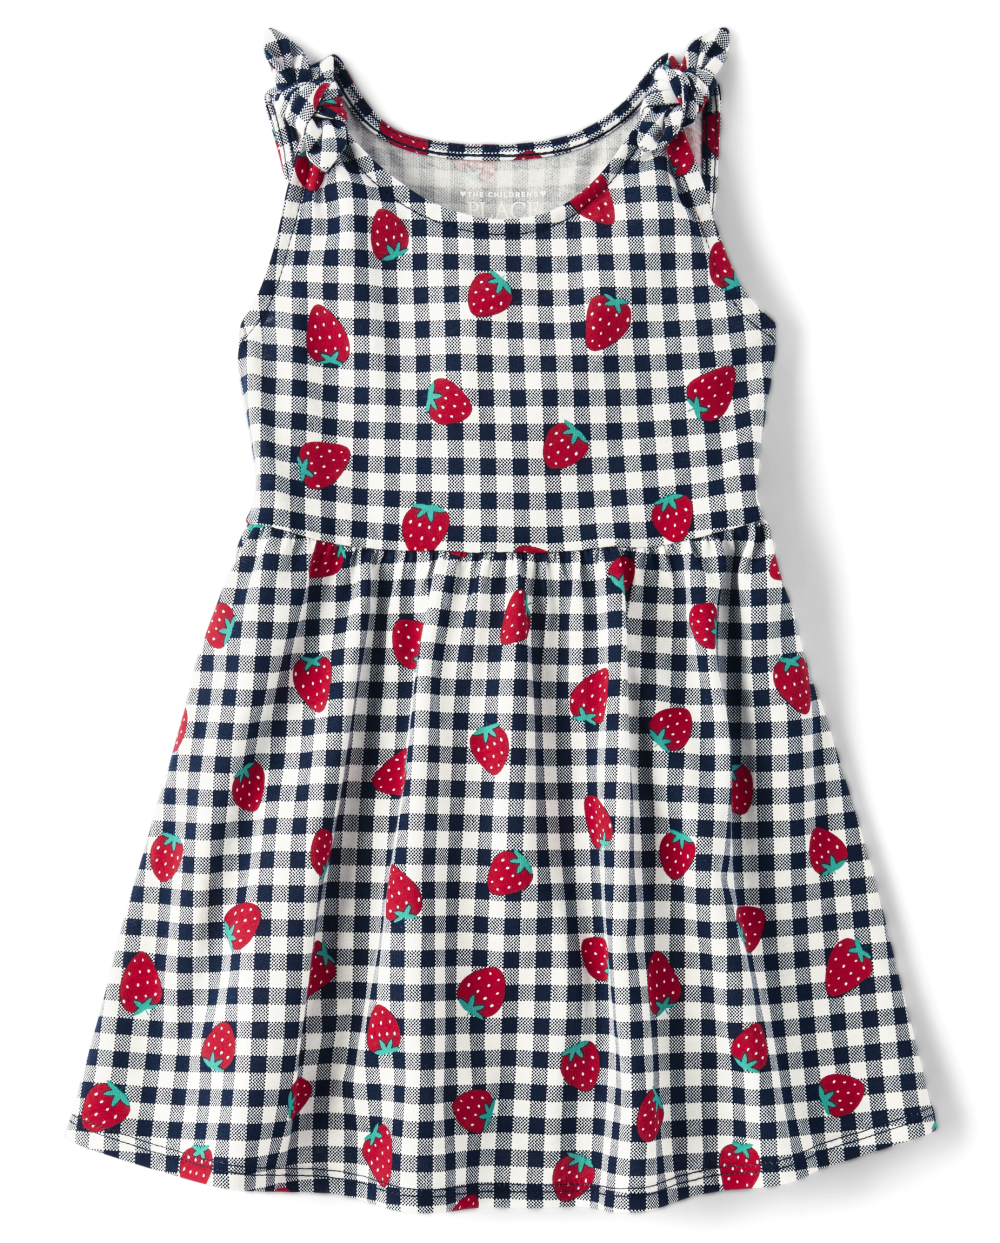 Toddler Baby Sleeveless Scoop Neck Above the Knee Checkered Gingham Print Dress